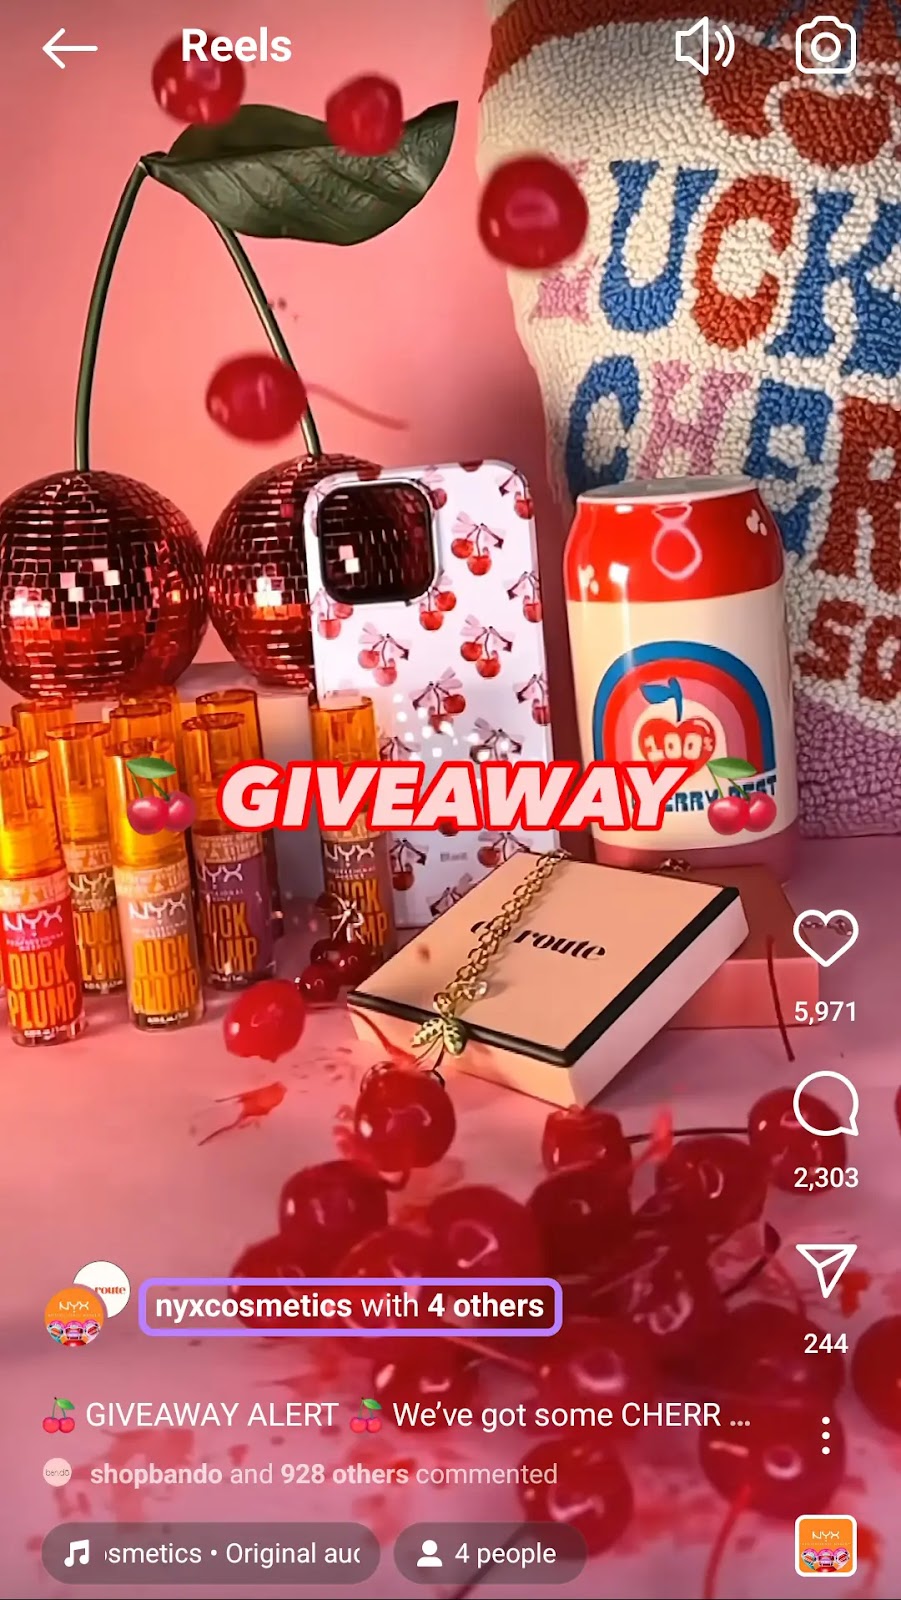 NYX Cosmetics Instagram reel featuring a giveaway with other brands